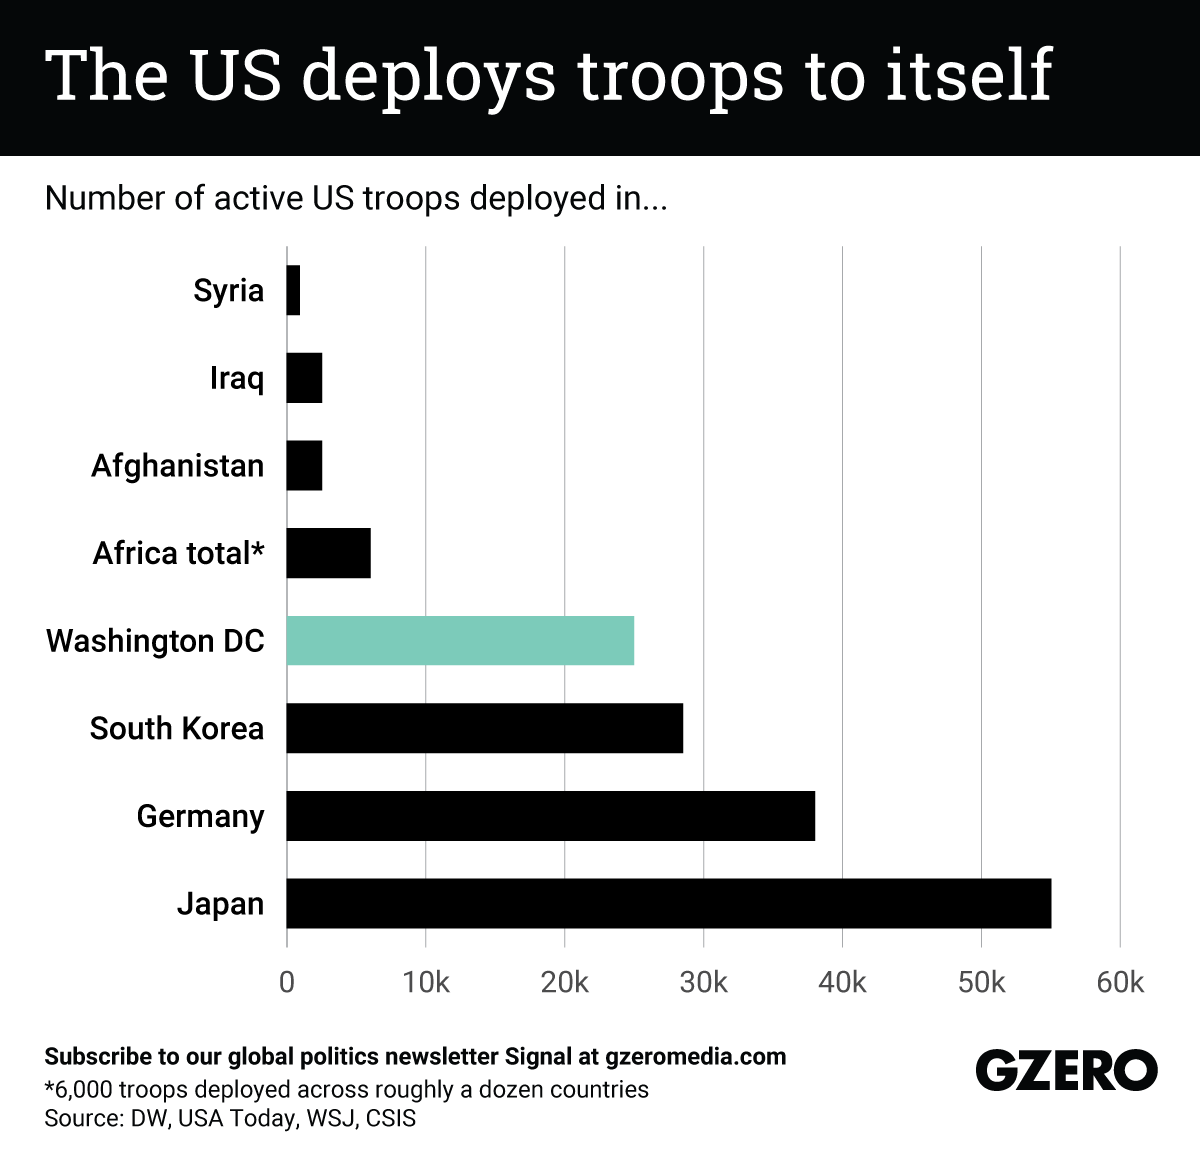 The Graphic Truth: The US deploys troops to itself